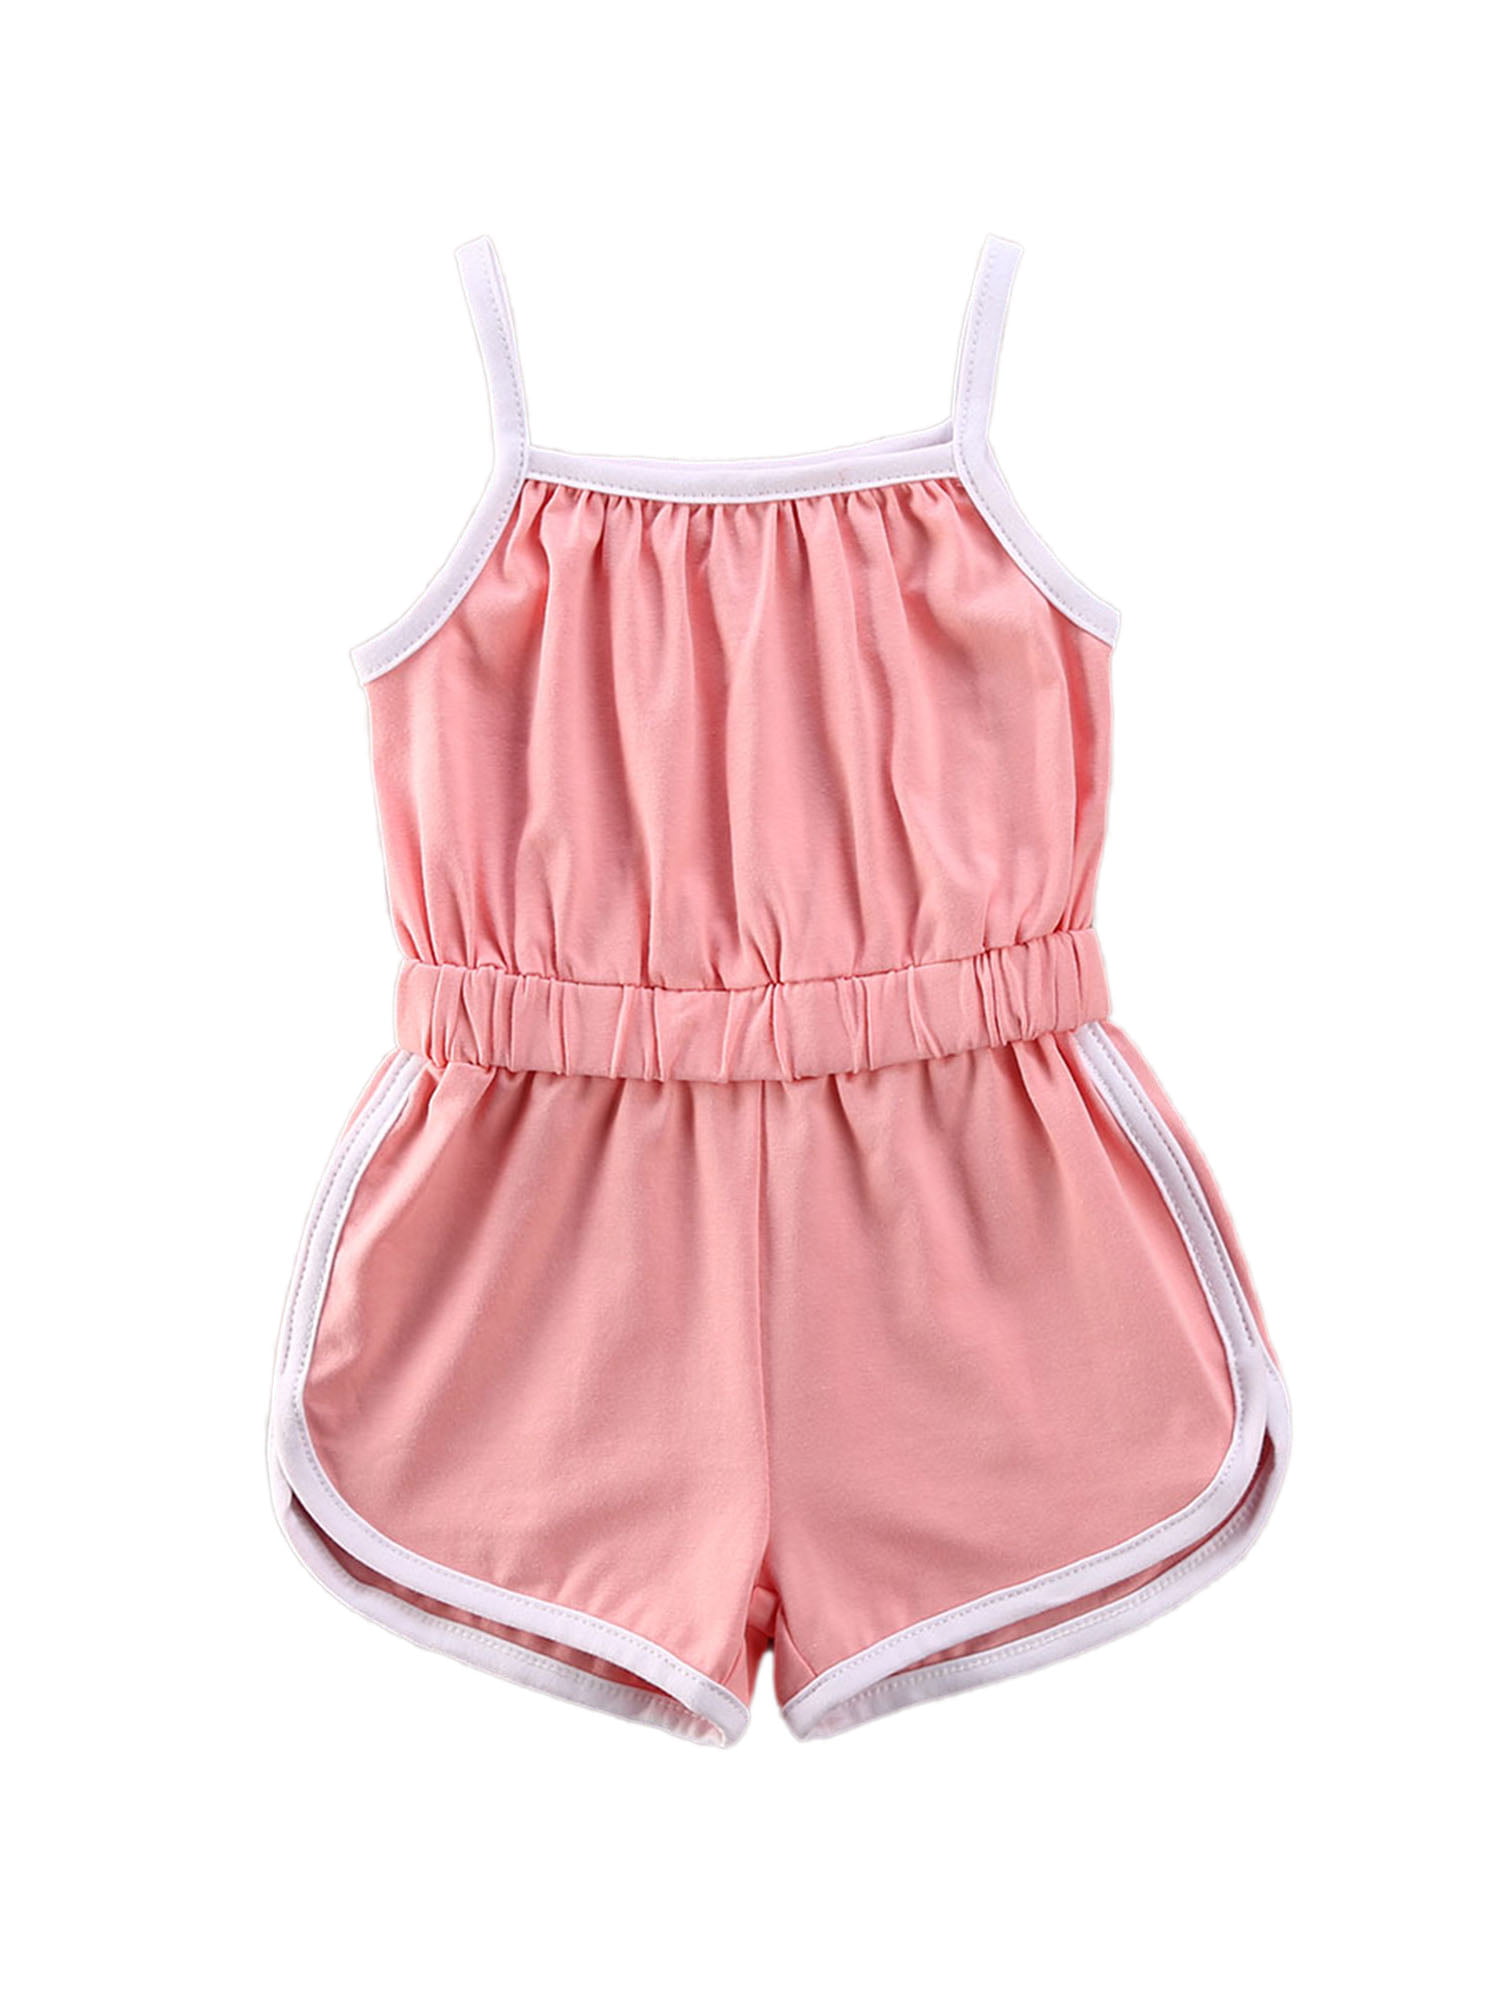 DuAnyozu Summer Toddler Baby Girl Sleeveless Solid Romper Jumpsuit Overall Shorts One Piece Outfit Clothes